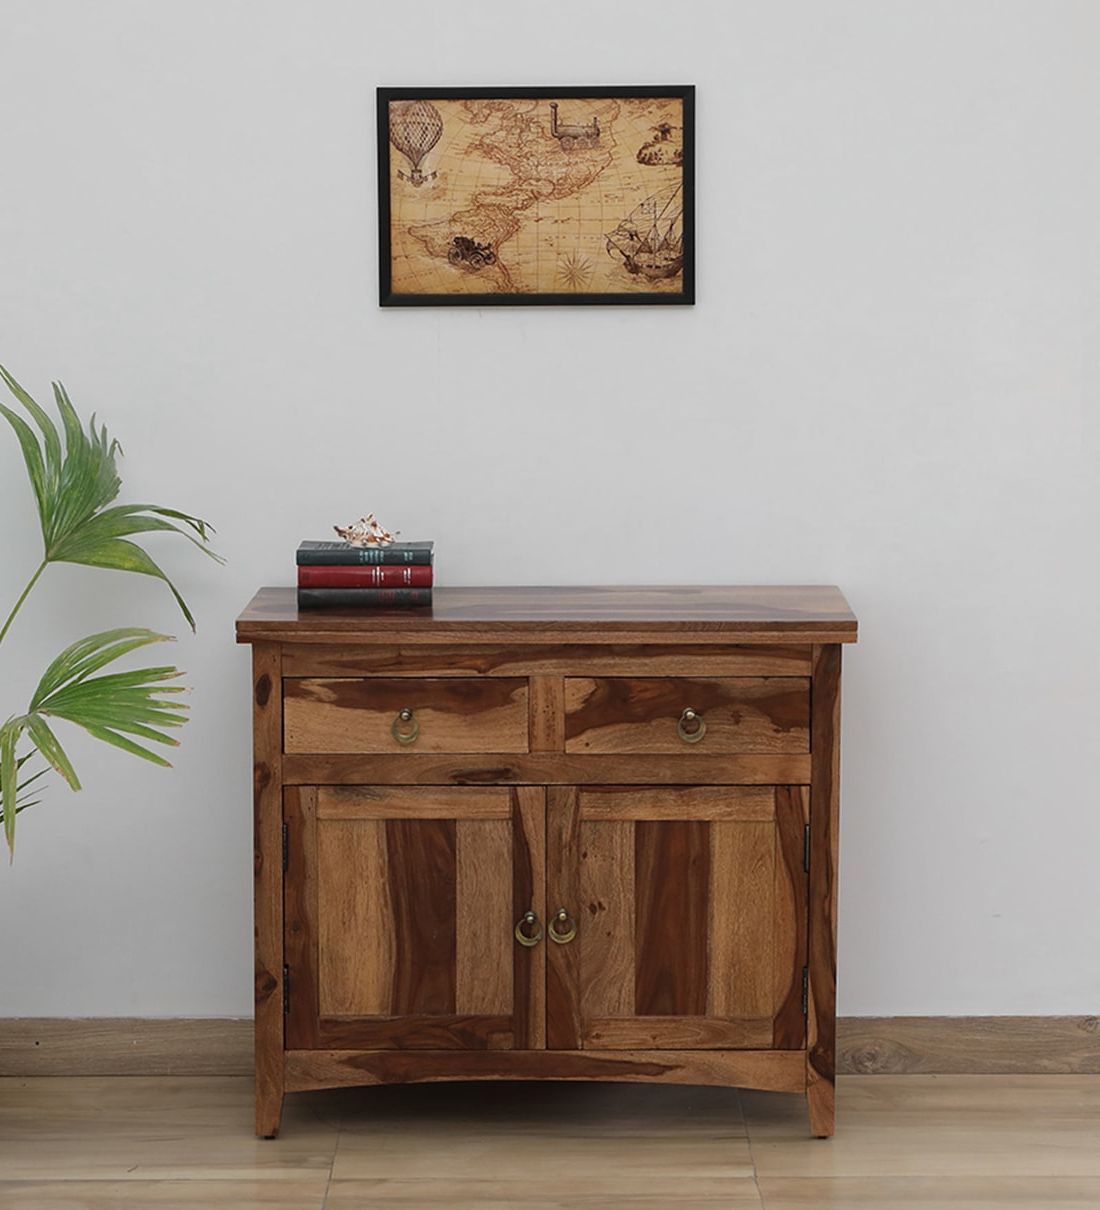 [%buy Biscay Sheesham Wood Sideboard In Scratch Resistant Rustic Teak Finish  At 2% Offwoodsworth From Pepperfry | Pepperfry Within Newest Brown Finished Wood Sideboards|brown Finished Wood Sideboards Regarding Best And Newest Buy Biscay Sheesham Wood Sideboard In Scratch Resistant Rustic Teak Finish  At 2% Offwoodsworth From Pepperfry | Pepperfry|preferred Brown Finished Wood Sideboards With Regard To Buy Biscay Sheesham Wood Sideboard In Scratch Resistant Rustic Teak Finish  At 2% Offwoodsworth From Pepperfry | Pepperfry|well Known Buy Biscay Sheesham Wood Sideboard In Scratch Resistant Rustic Teak Finish  At 2% Offwoodsworth From Pepperfry | Pepperfry For Brown Finished Wood Sideboards%] (View 7 of 10)